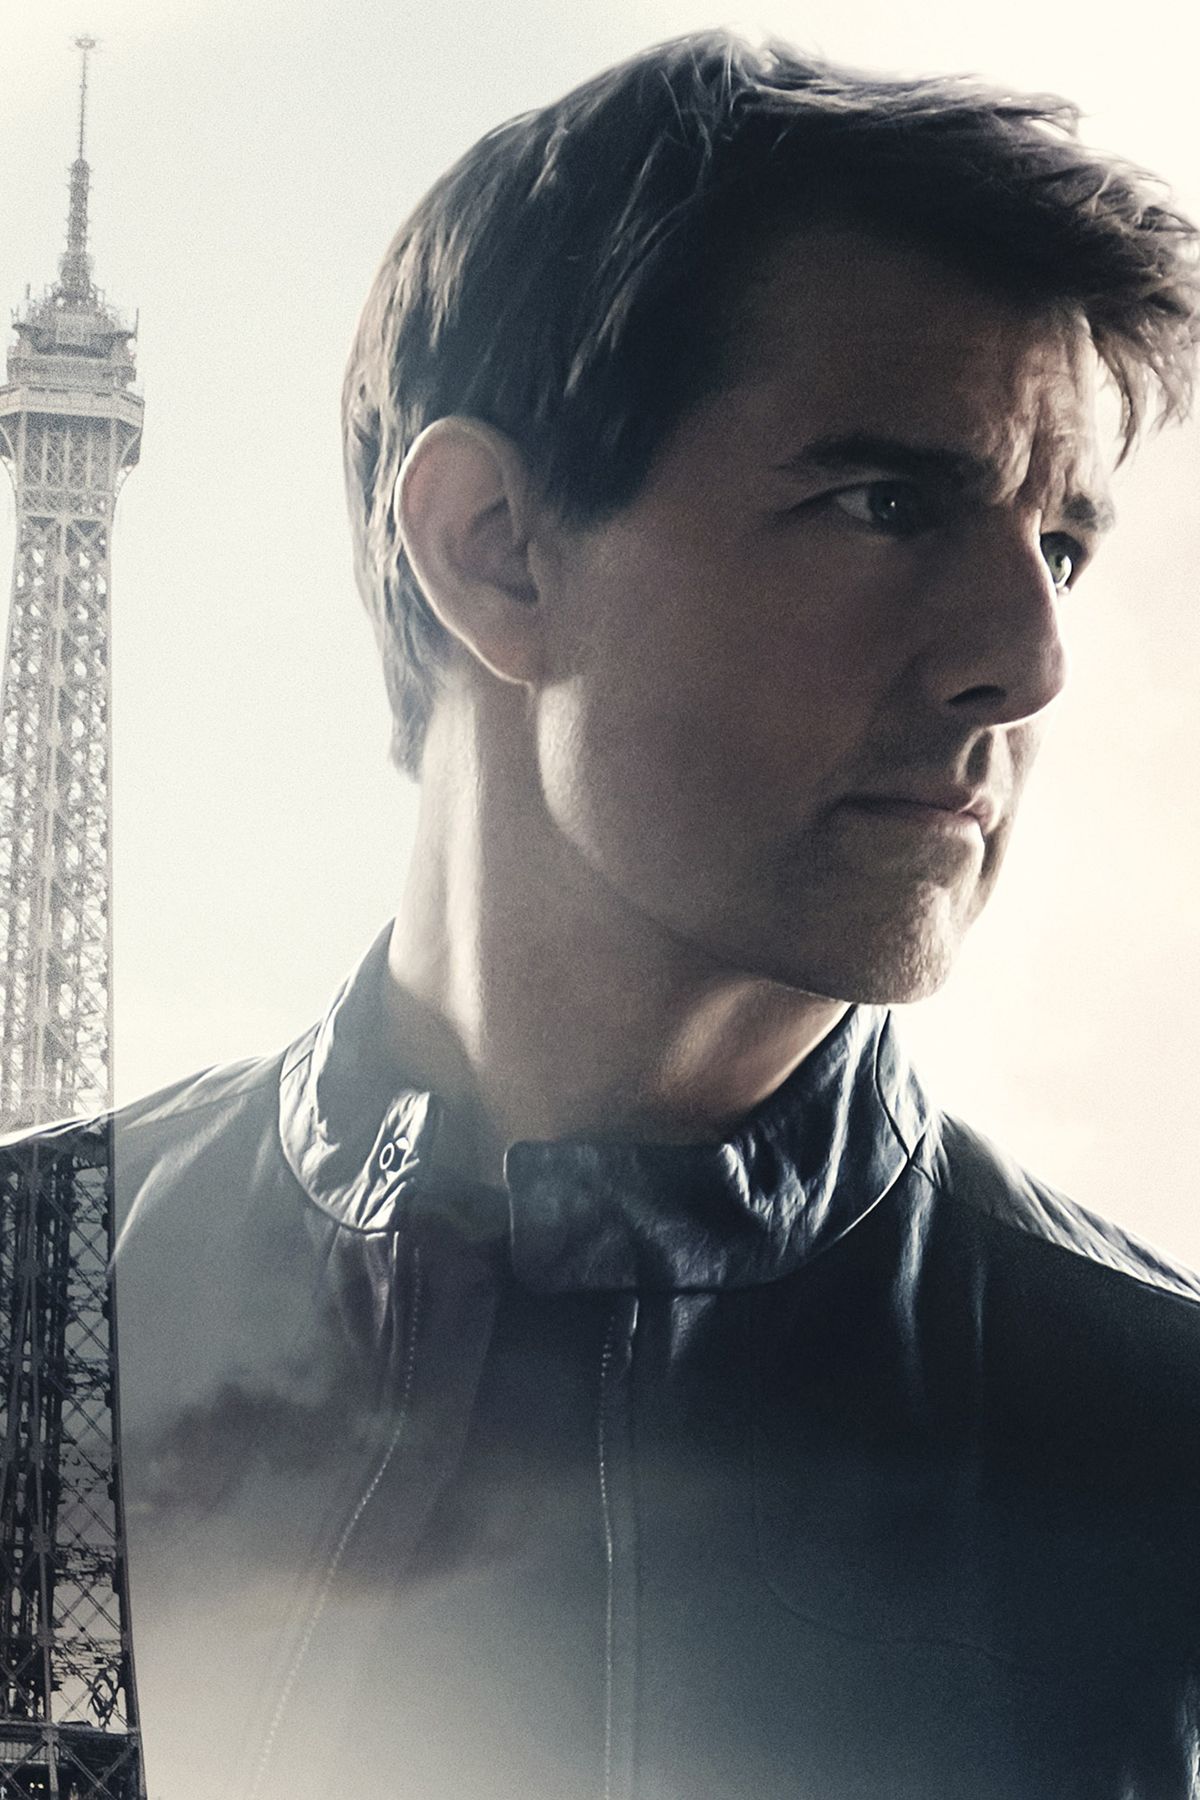 Tom cruise mission impossible fallout 4k mobile wallpaper